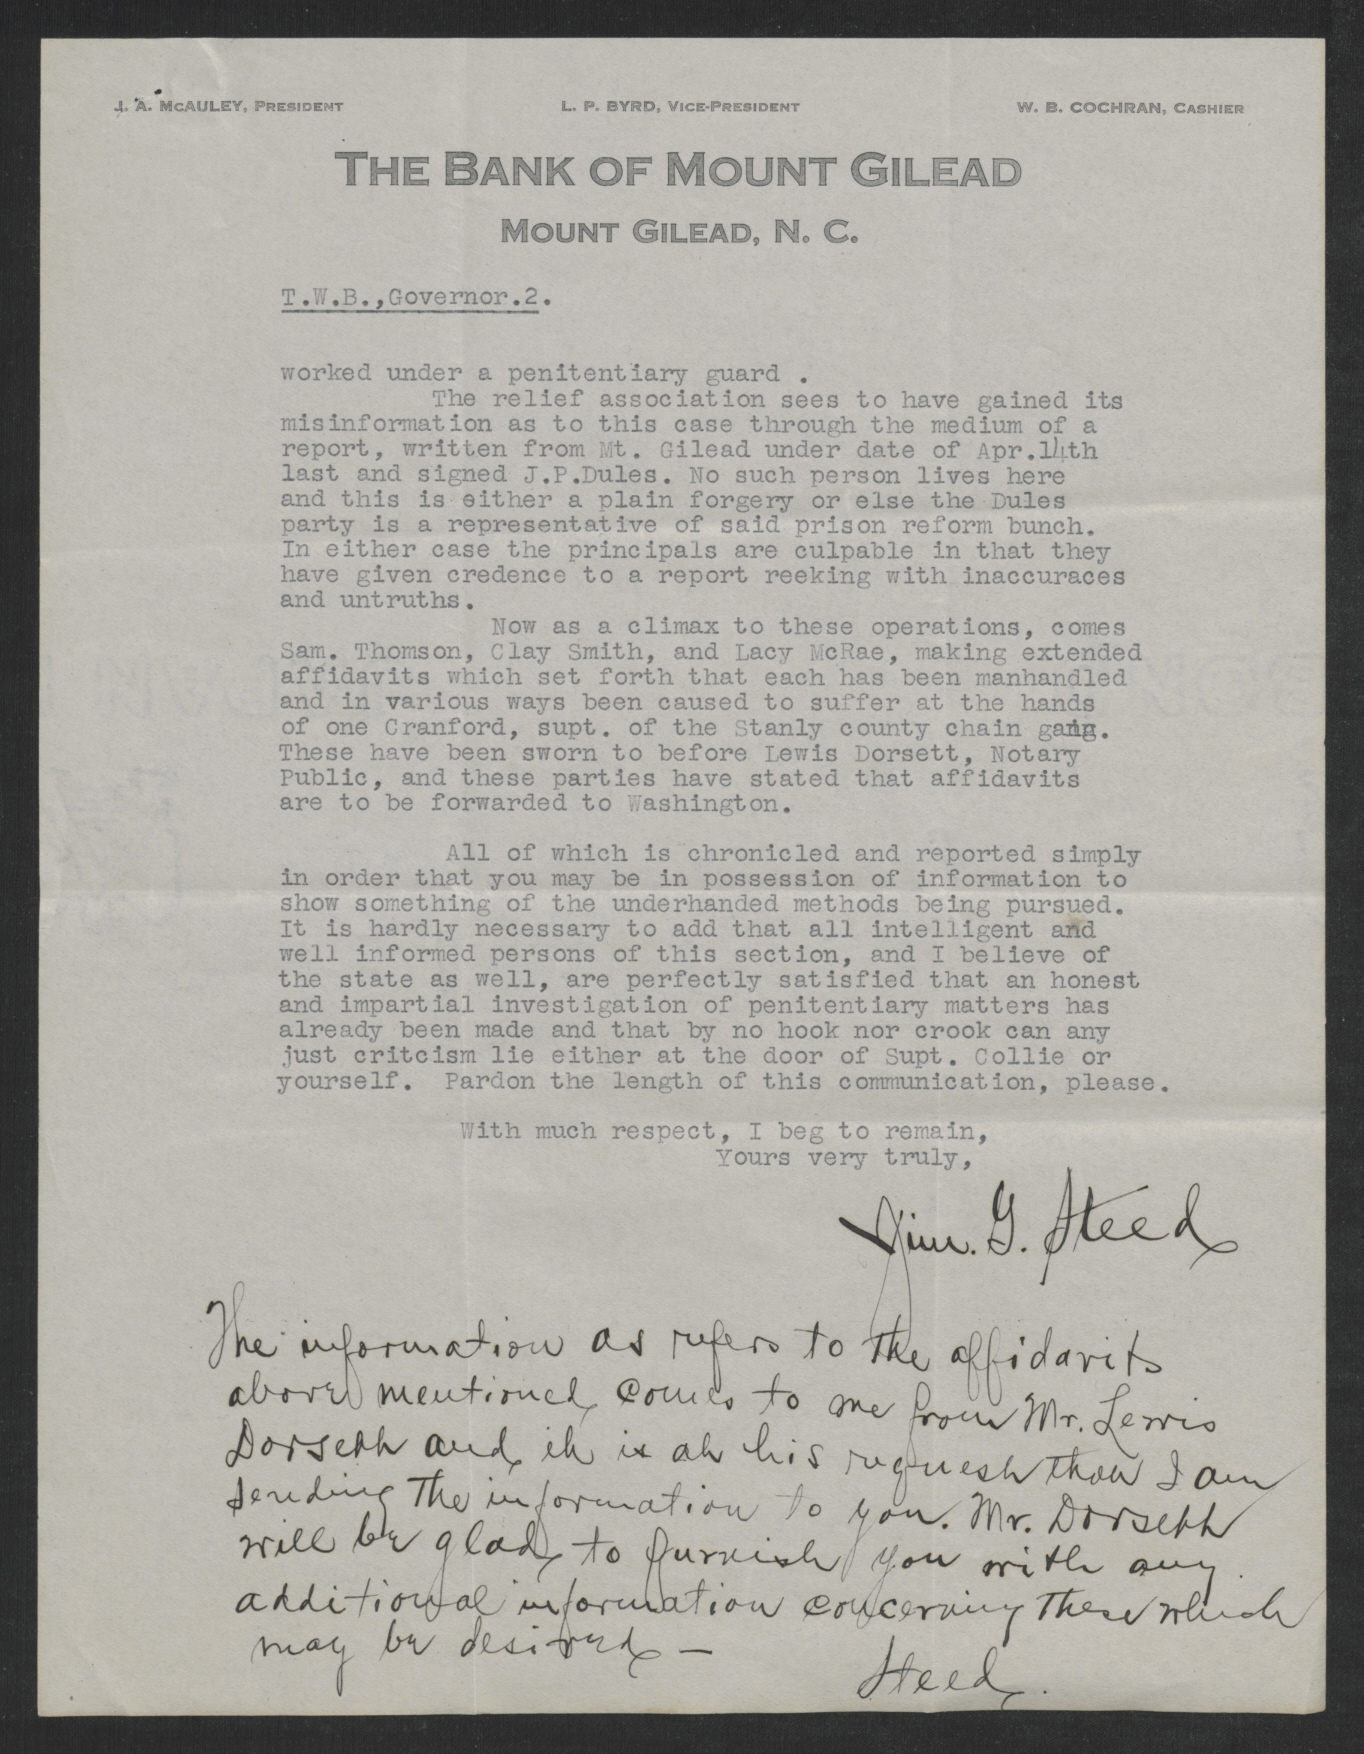 Letter from Steed to Bickett, July 1, 1919, page 2